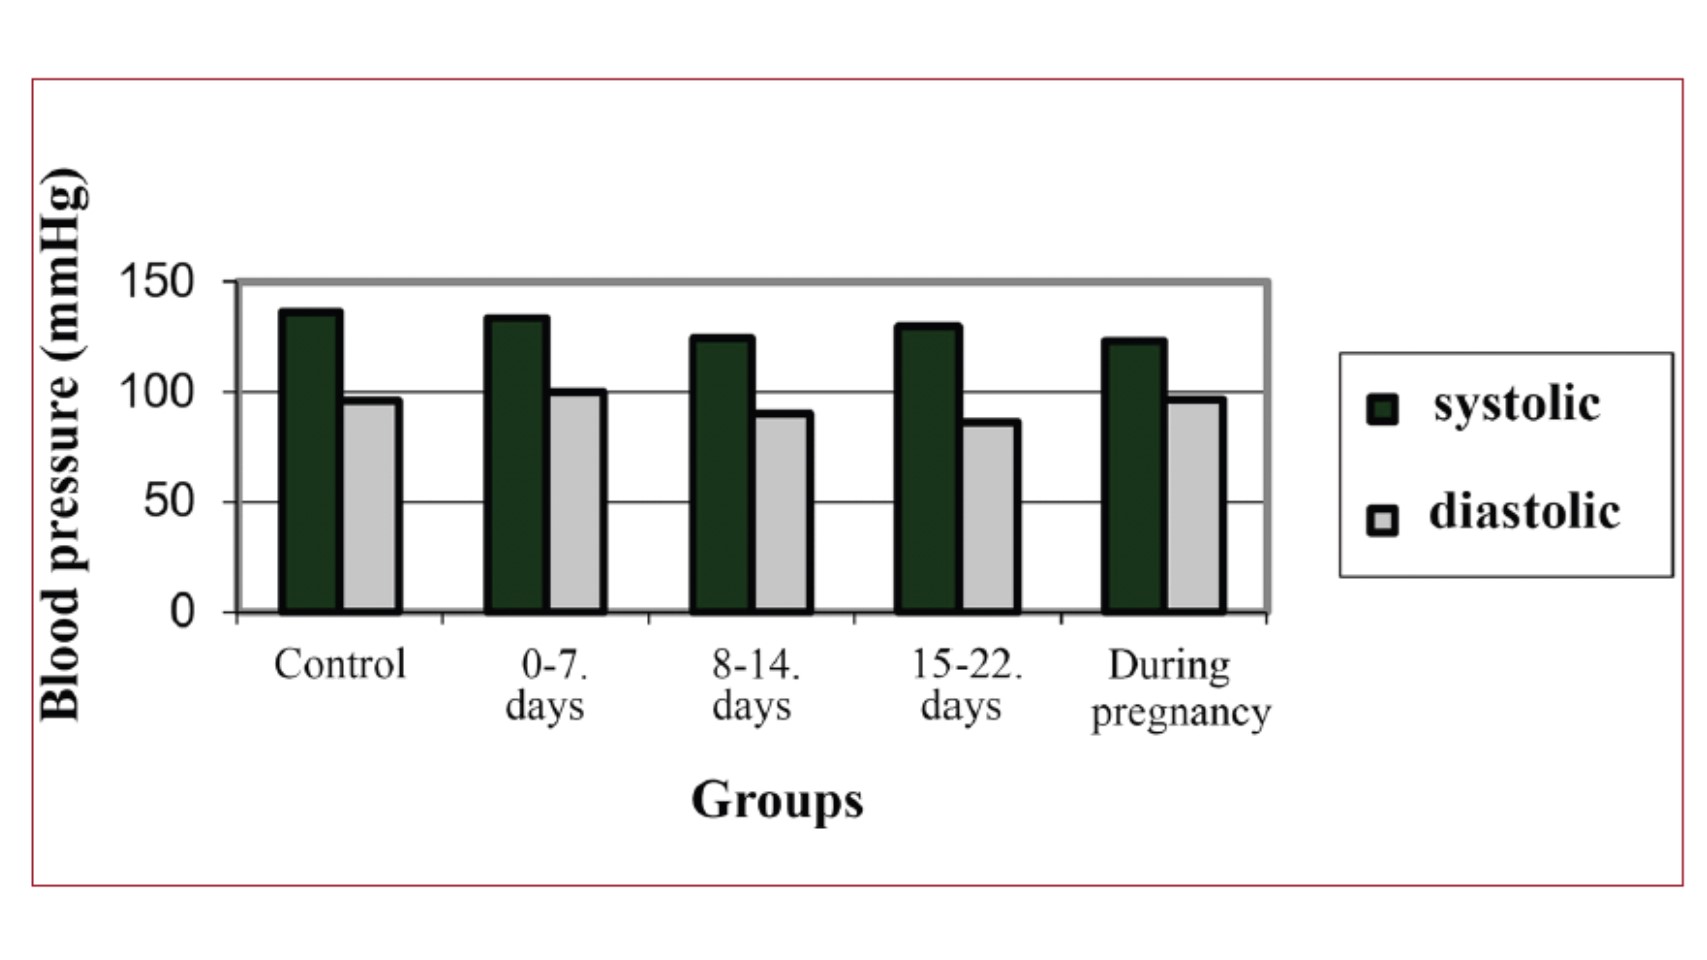 20th week blood pressures of the restricted diet group rats